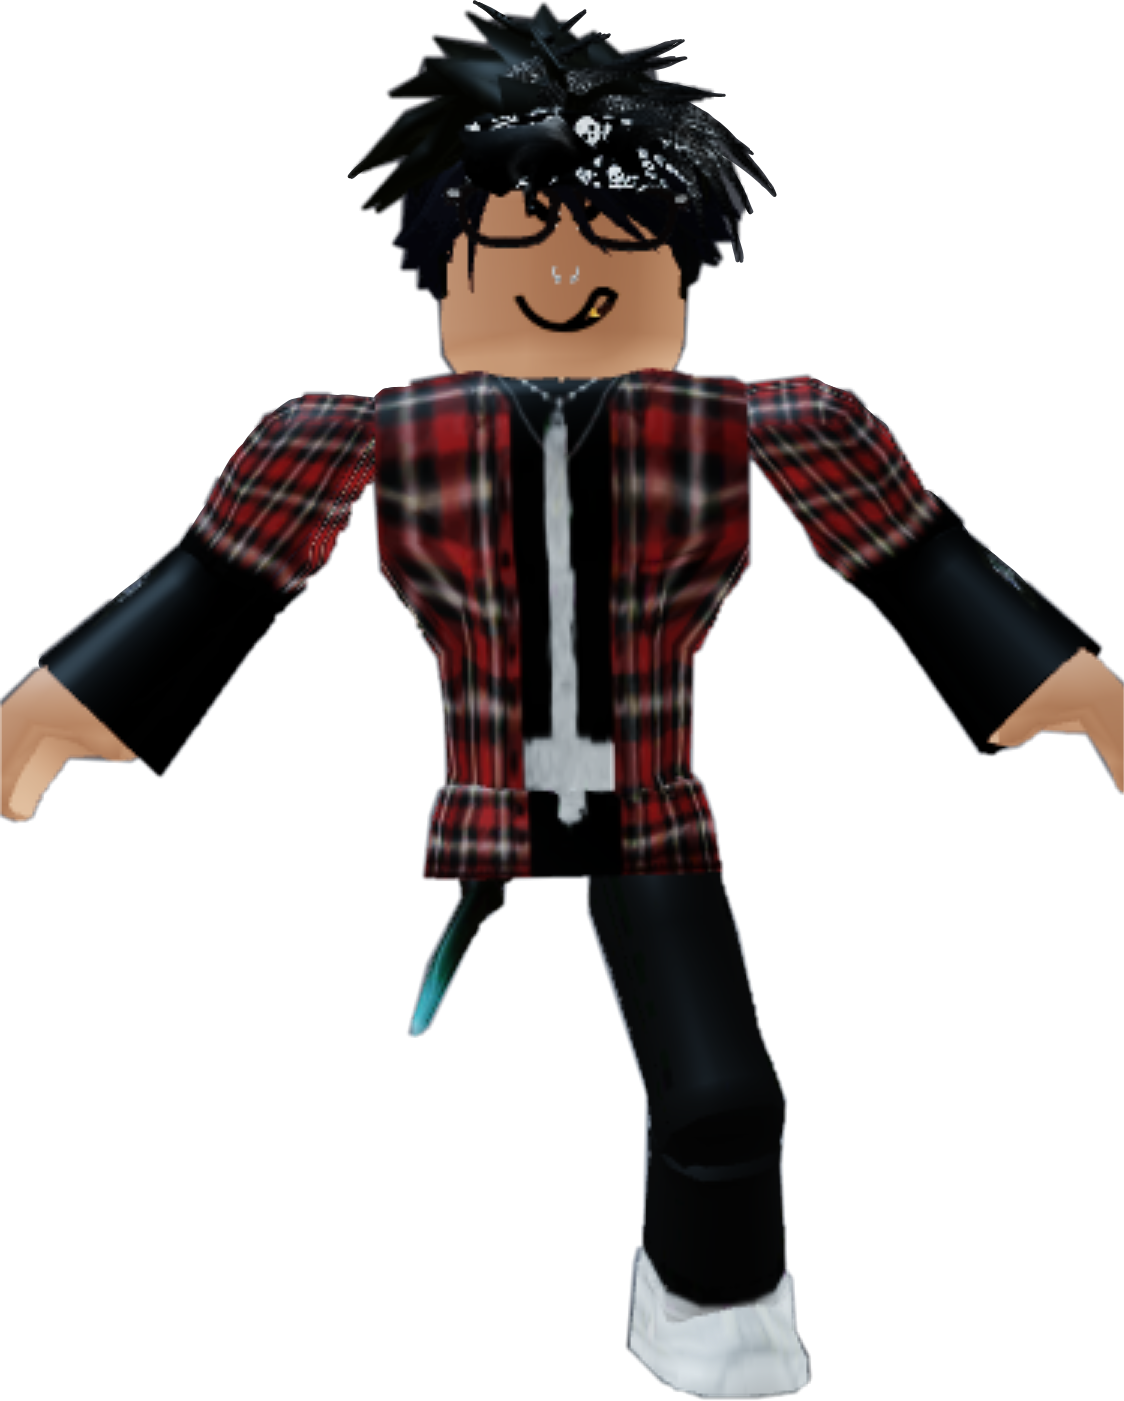 Copy And Paste Roblox Boy - boy roblox character slender